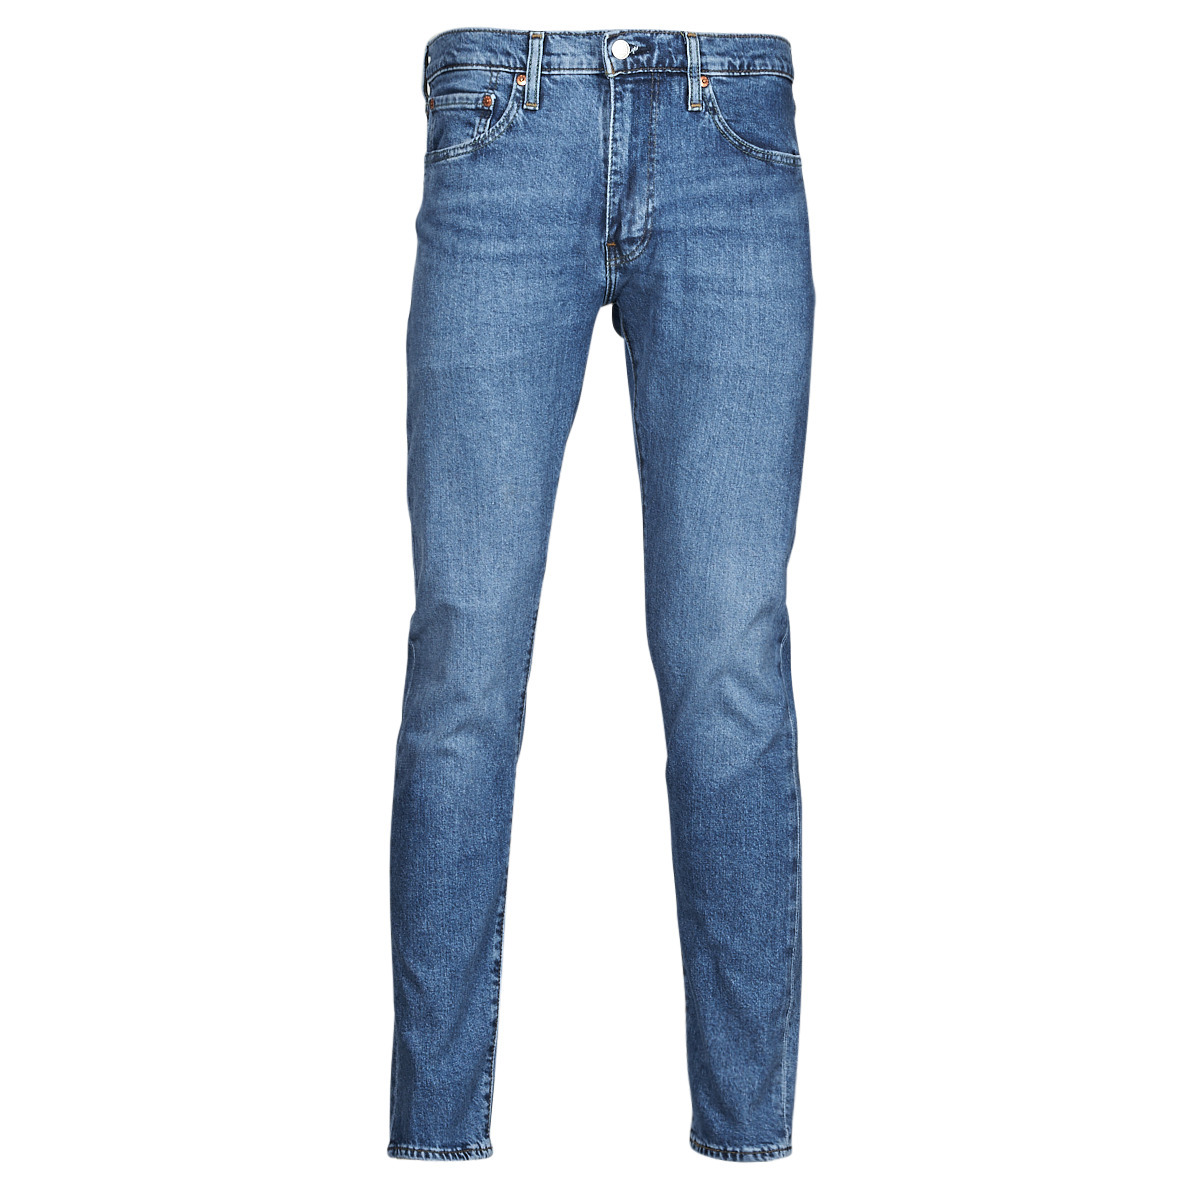 Spartoo Skinny Jeans in Blue by Levi's GOOFASH